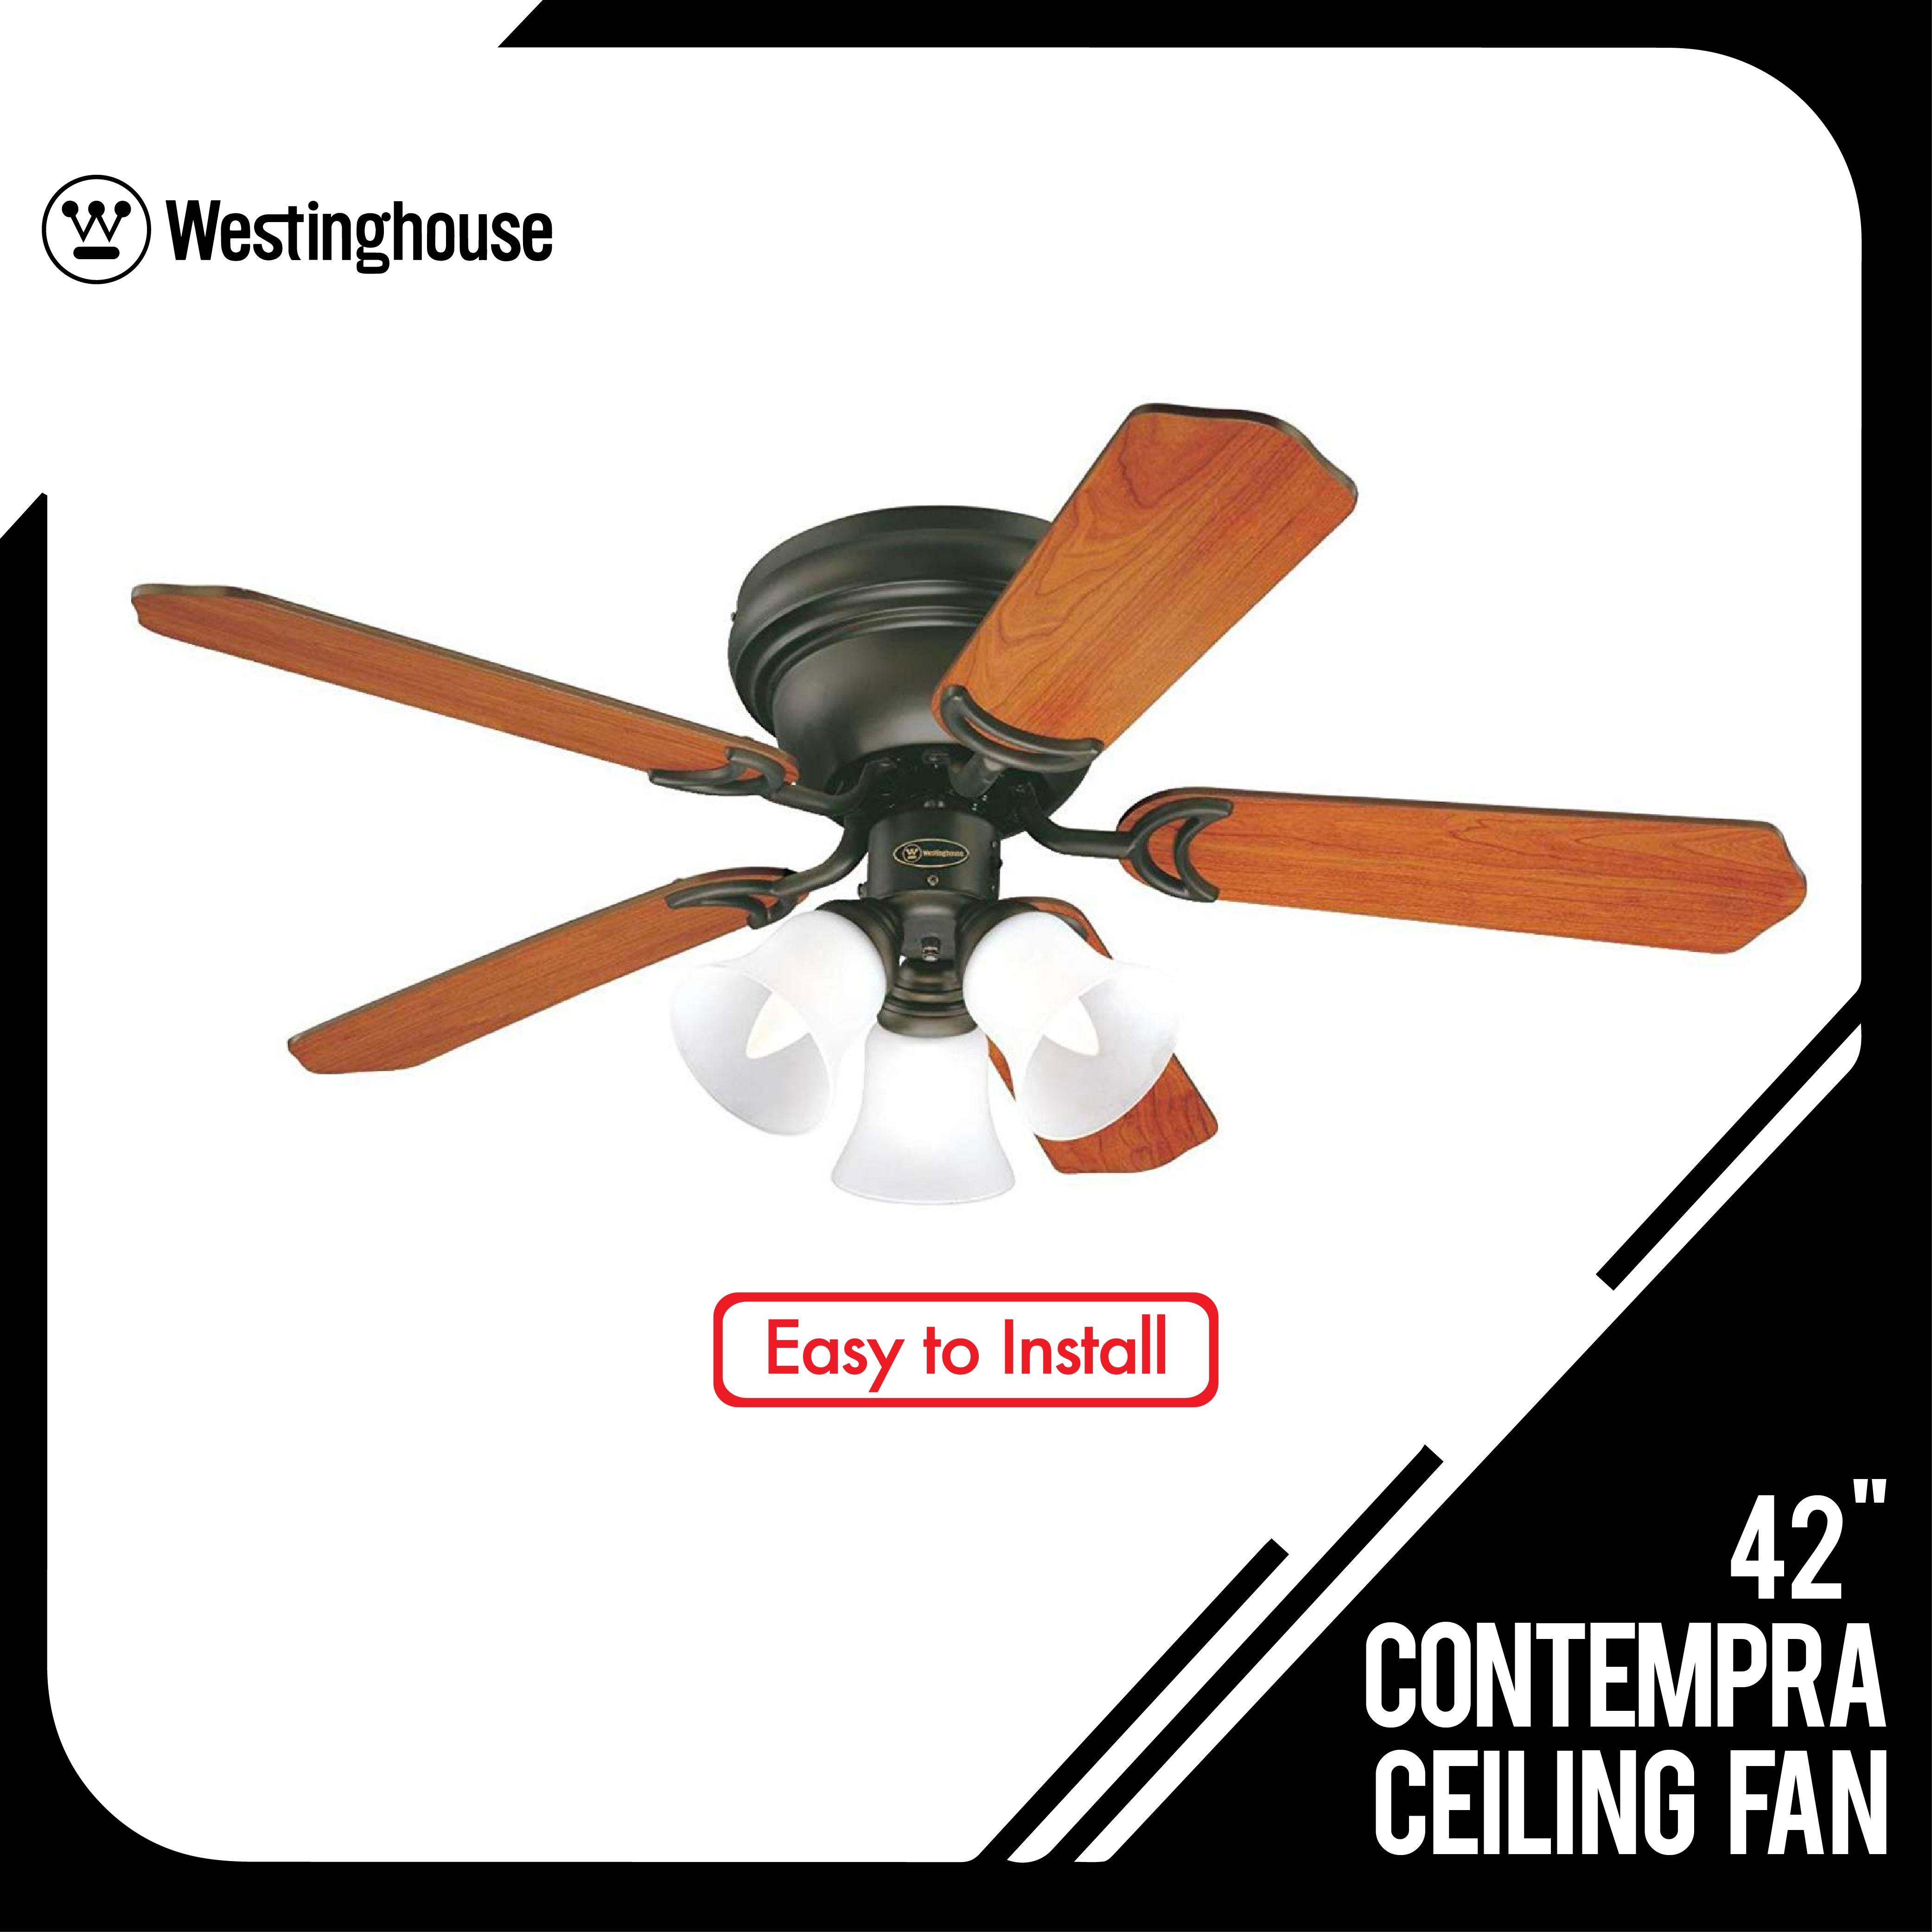 Westinghouse 42 Contempra Trio Ceiling Fan 78377 Will Require